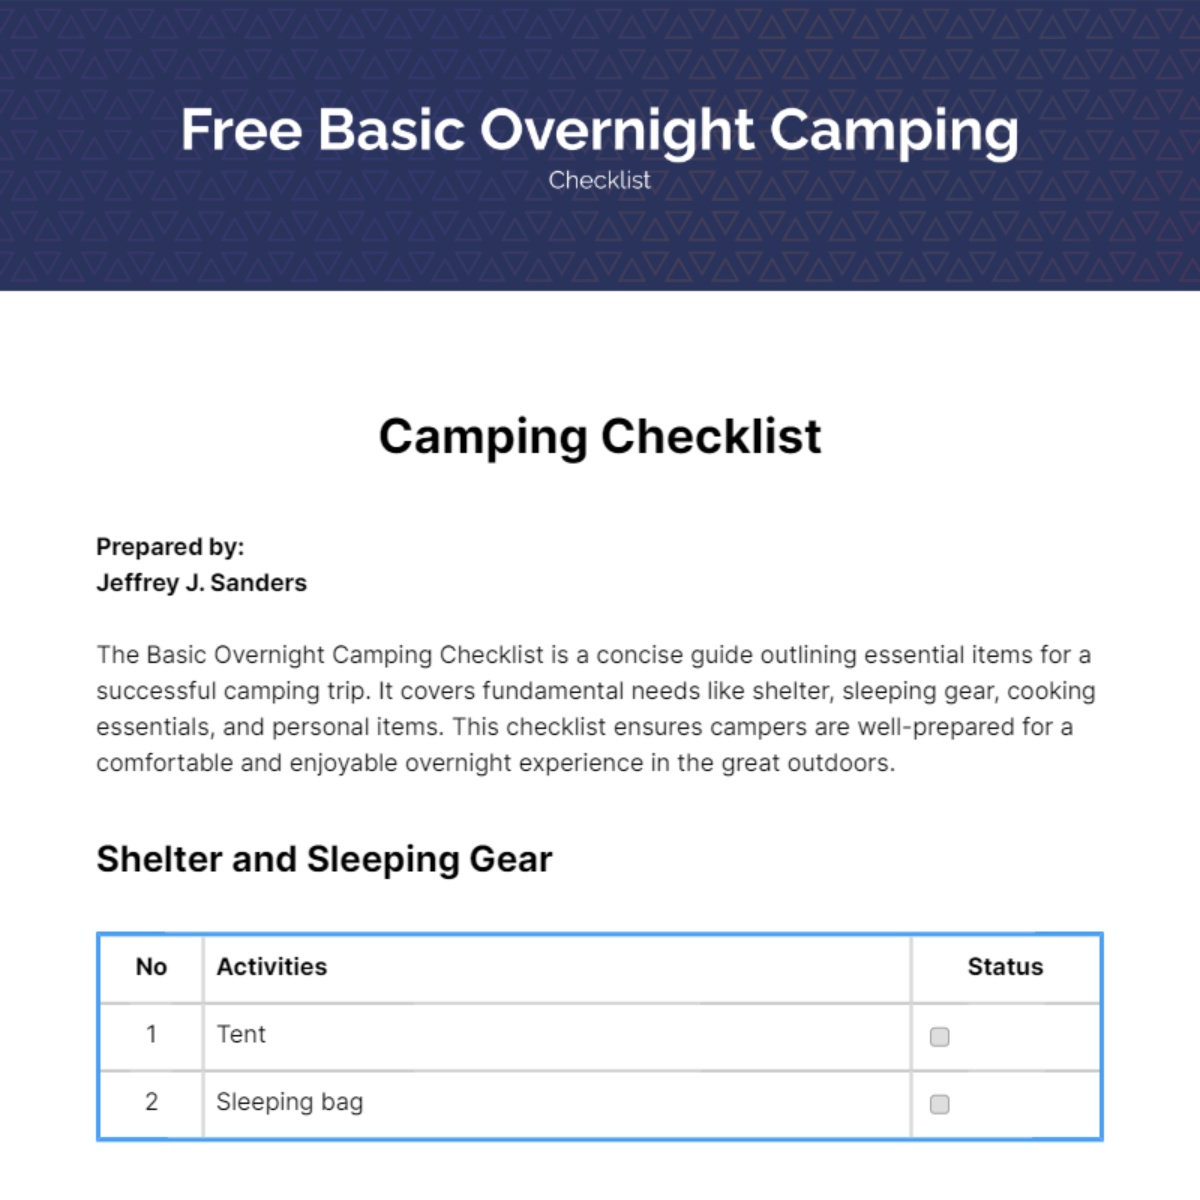 Free Basic Overnight Camping Checklist Template